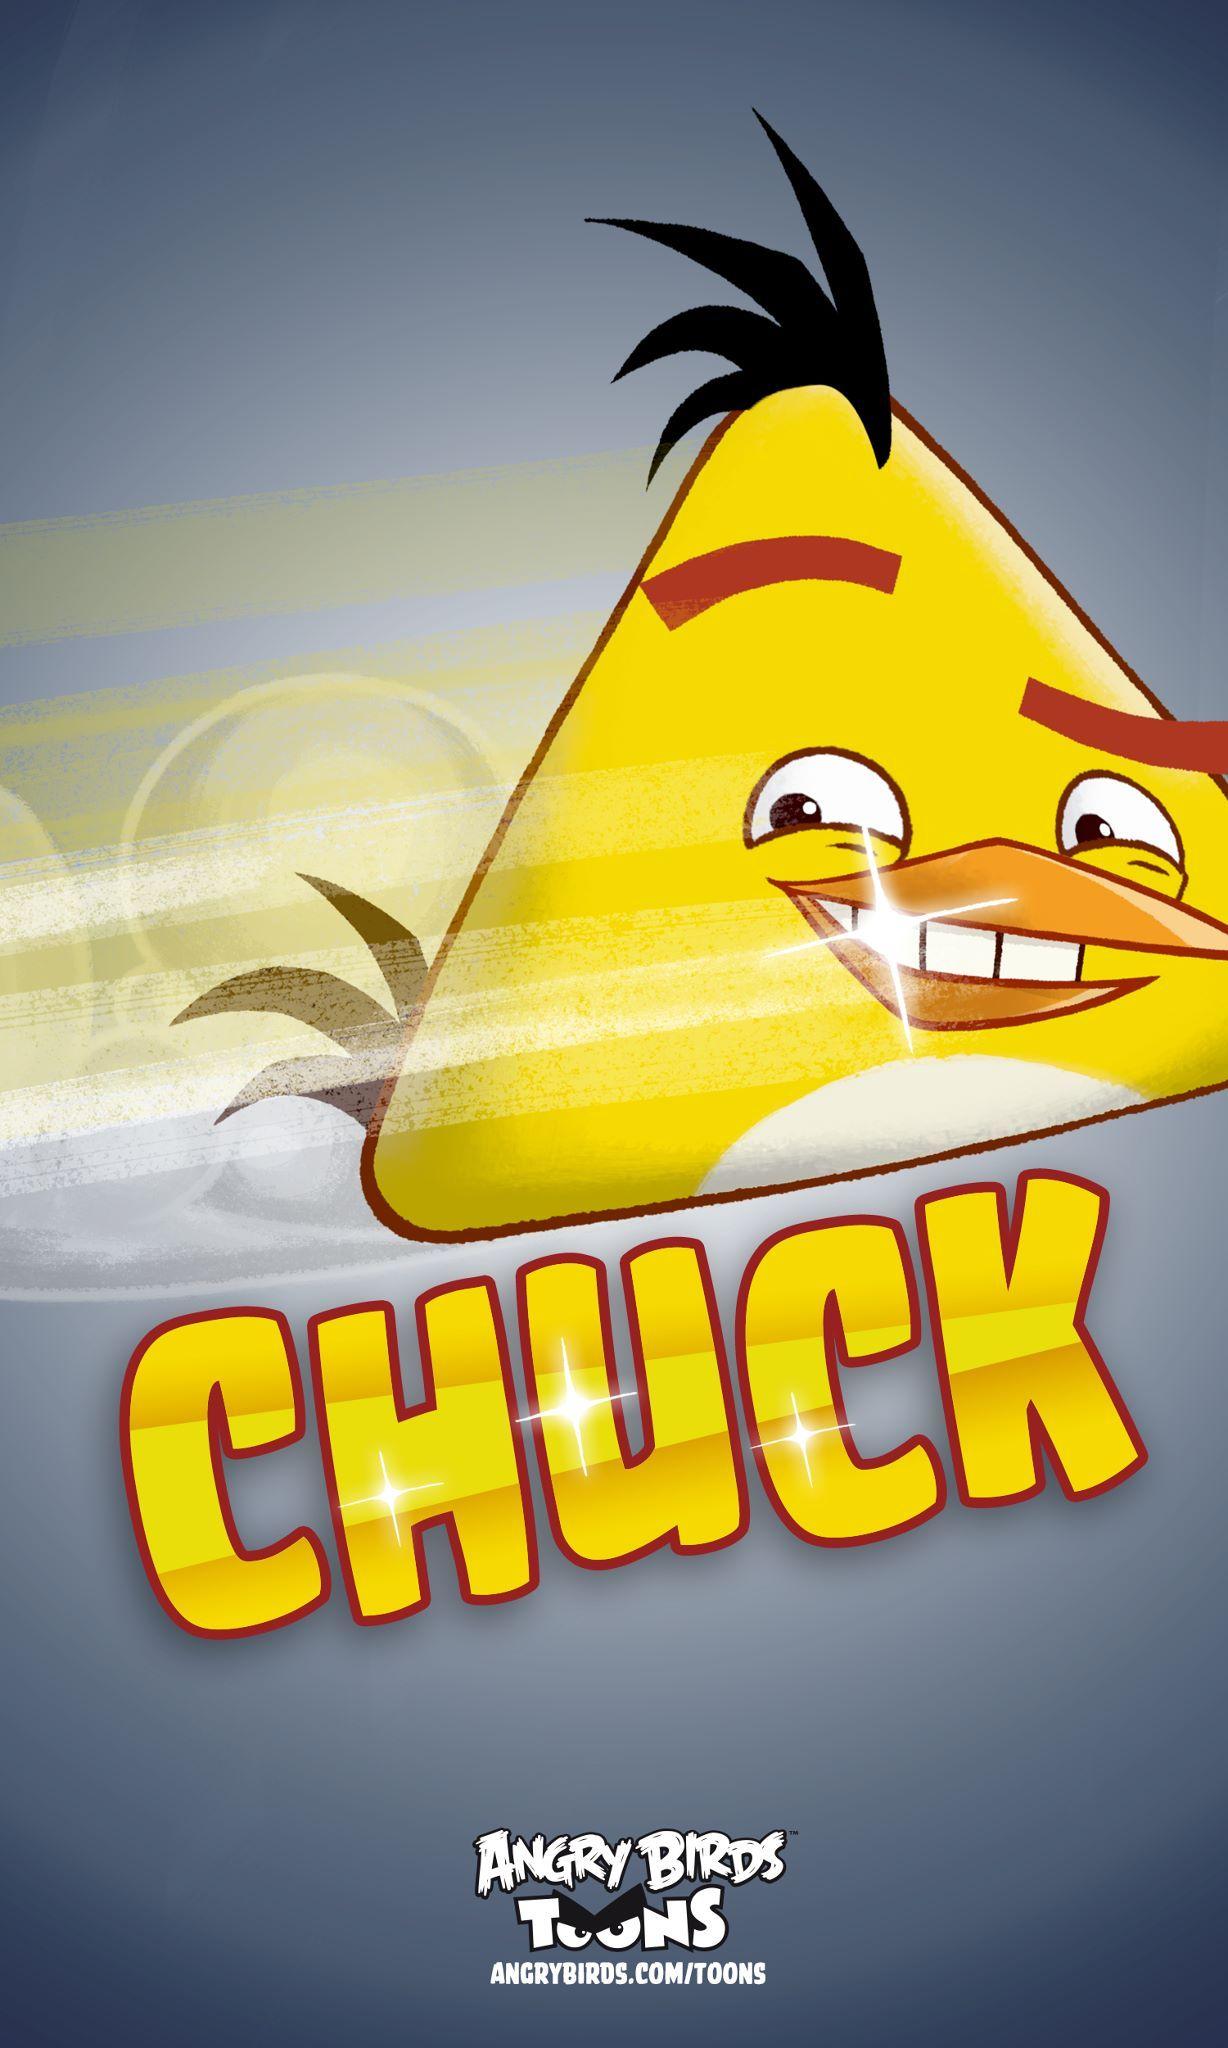 Chuck Image Gallery In 2019. Angry Birds. Angry Birds, Bird